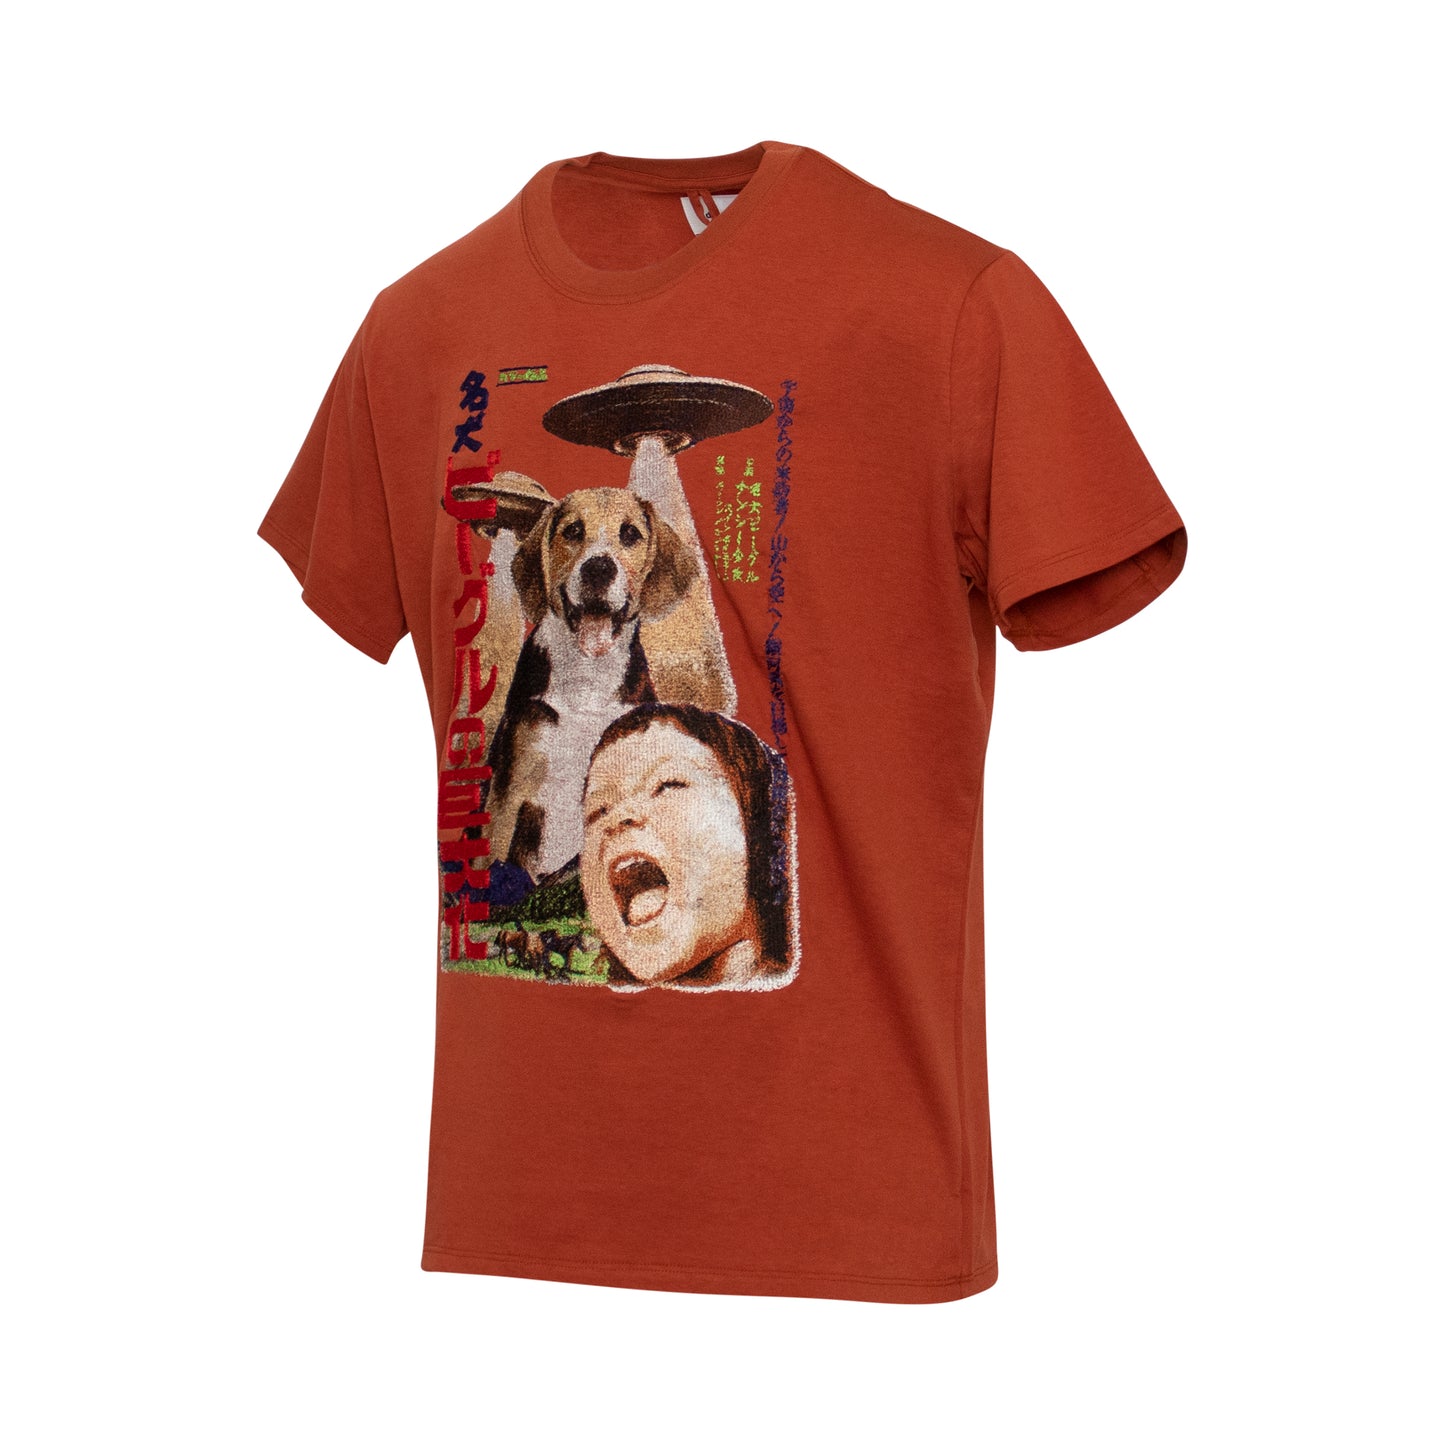 Retro Poster Embroidery T-Shirt in Brown